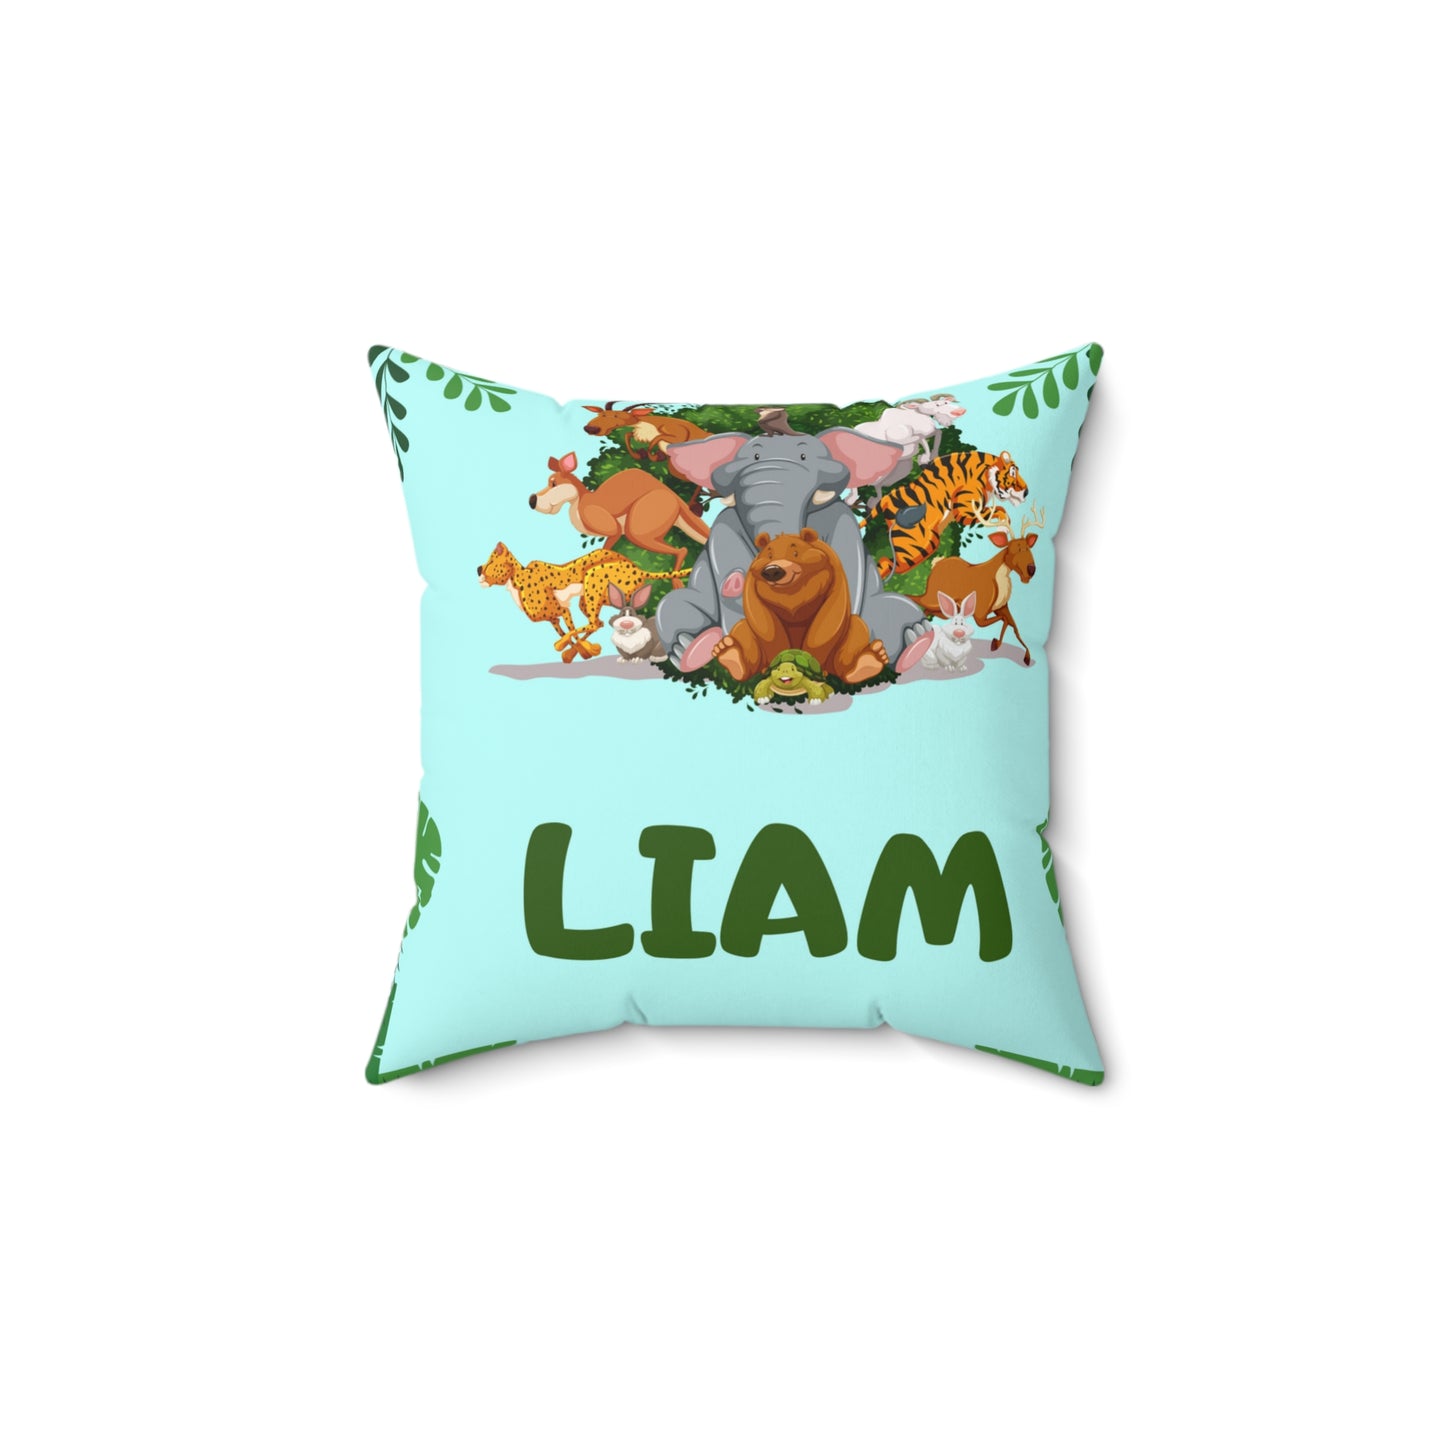 Modern and personalized cushion to decorate any space (Liam)